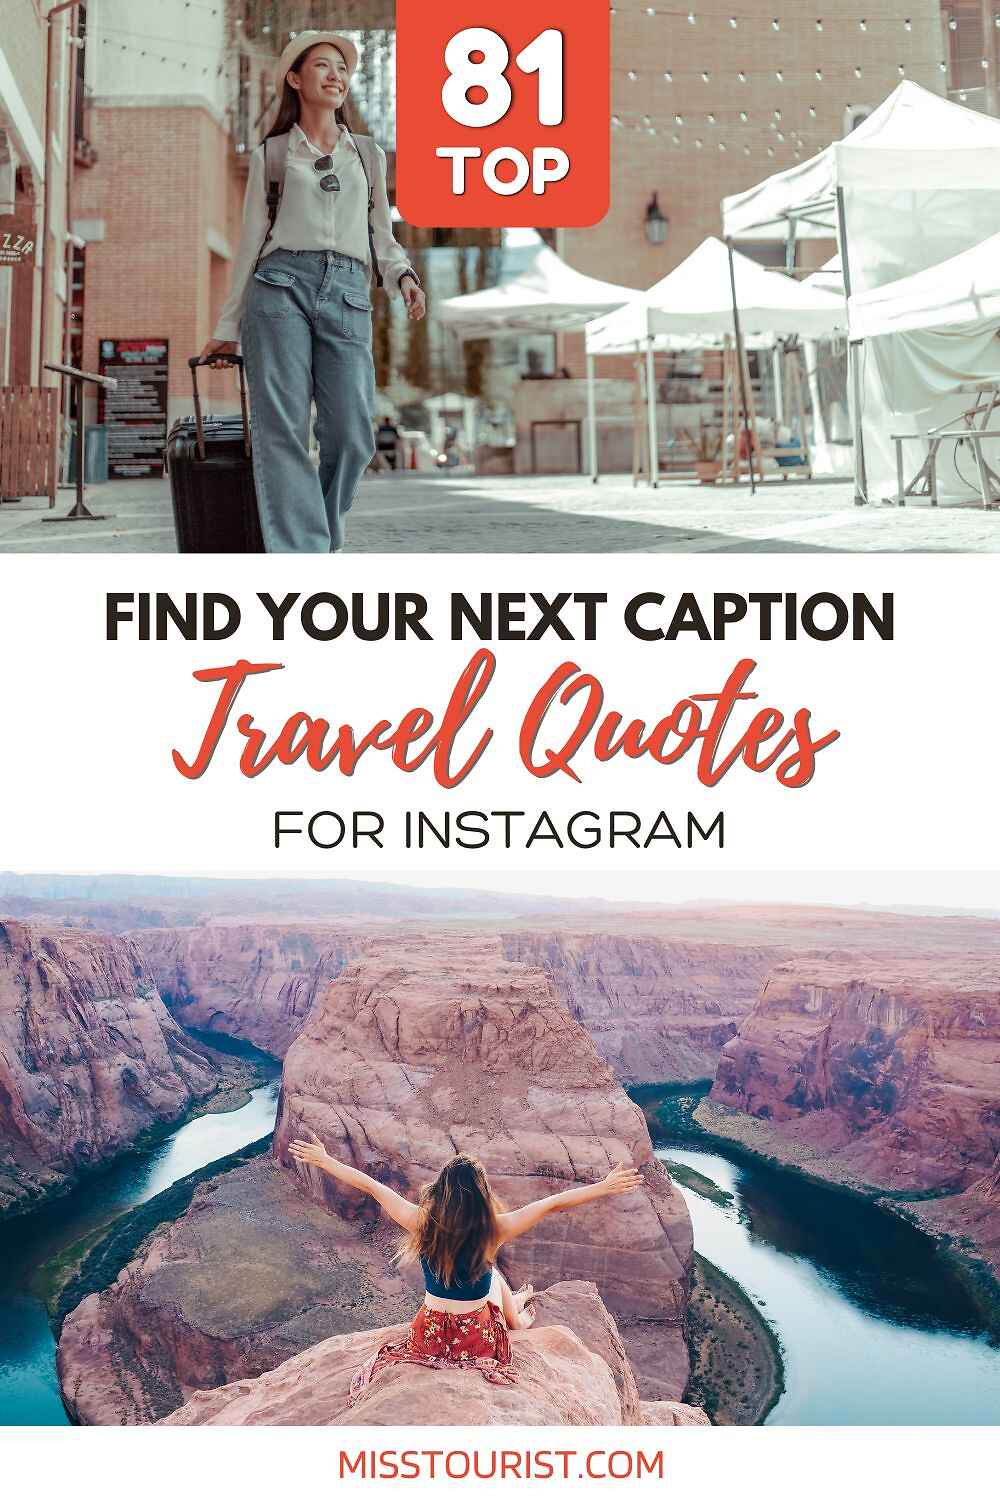 Image of a blog cover featuring a woman with a suitcase walking down a street, and another woman sitting at the edge of a canyon. Text reads, "81 Top Travel Quotes for Instagram.